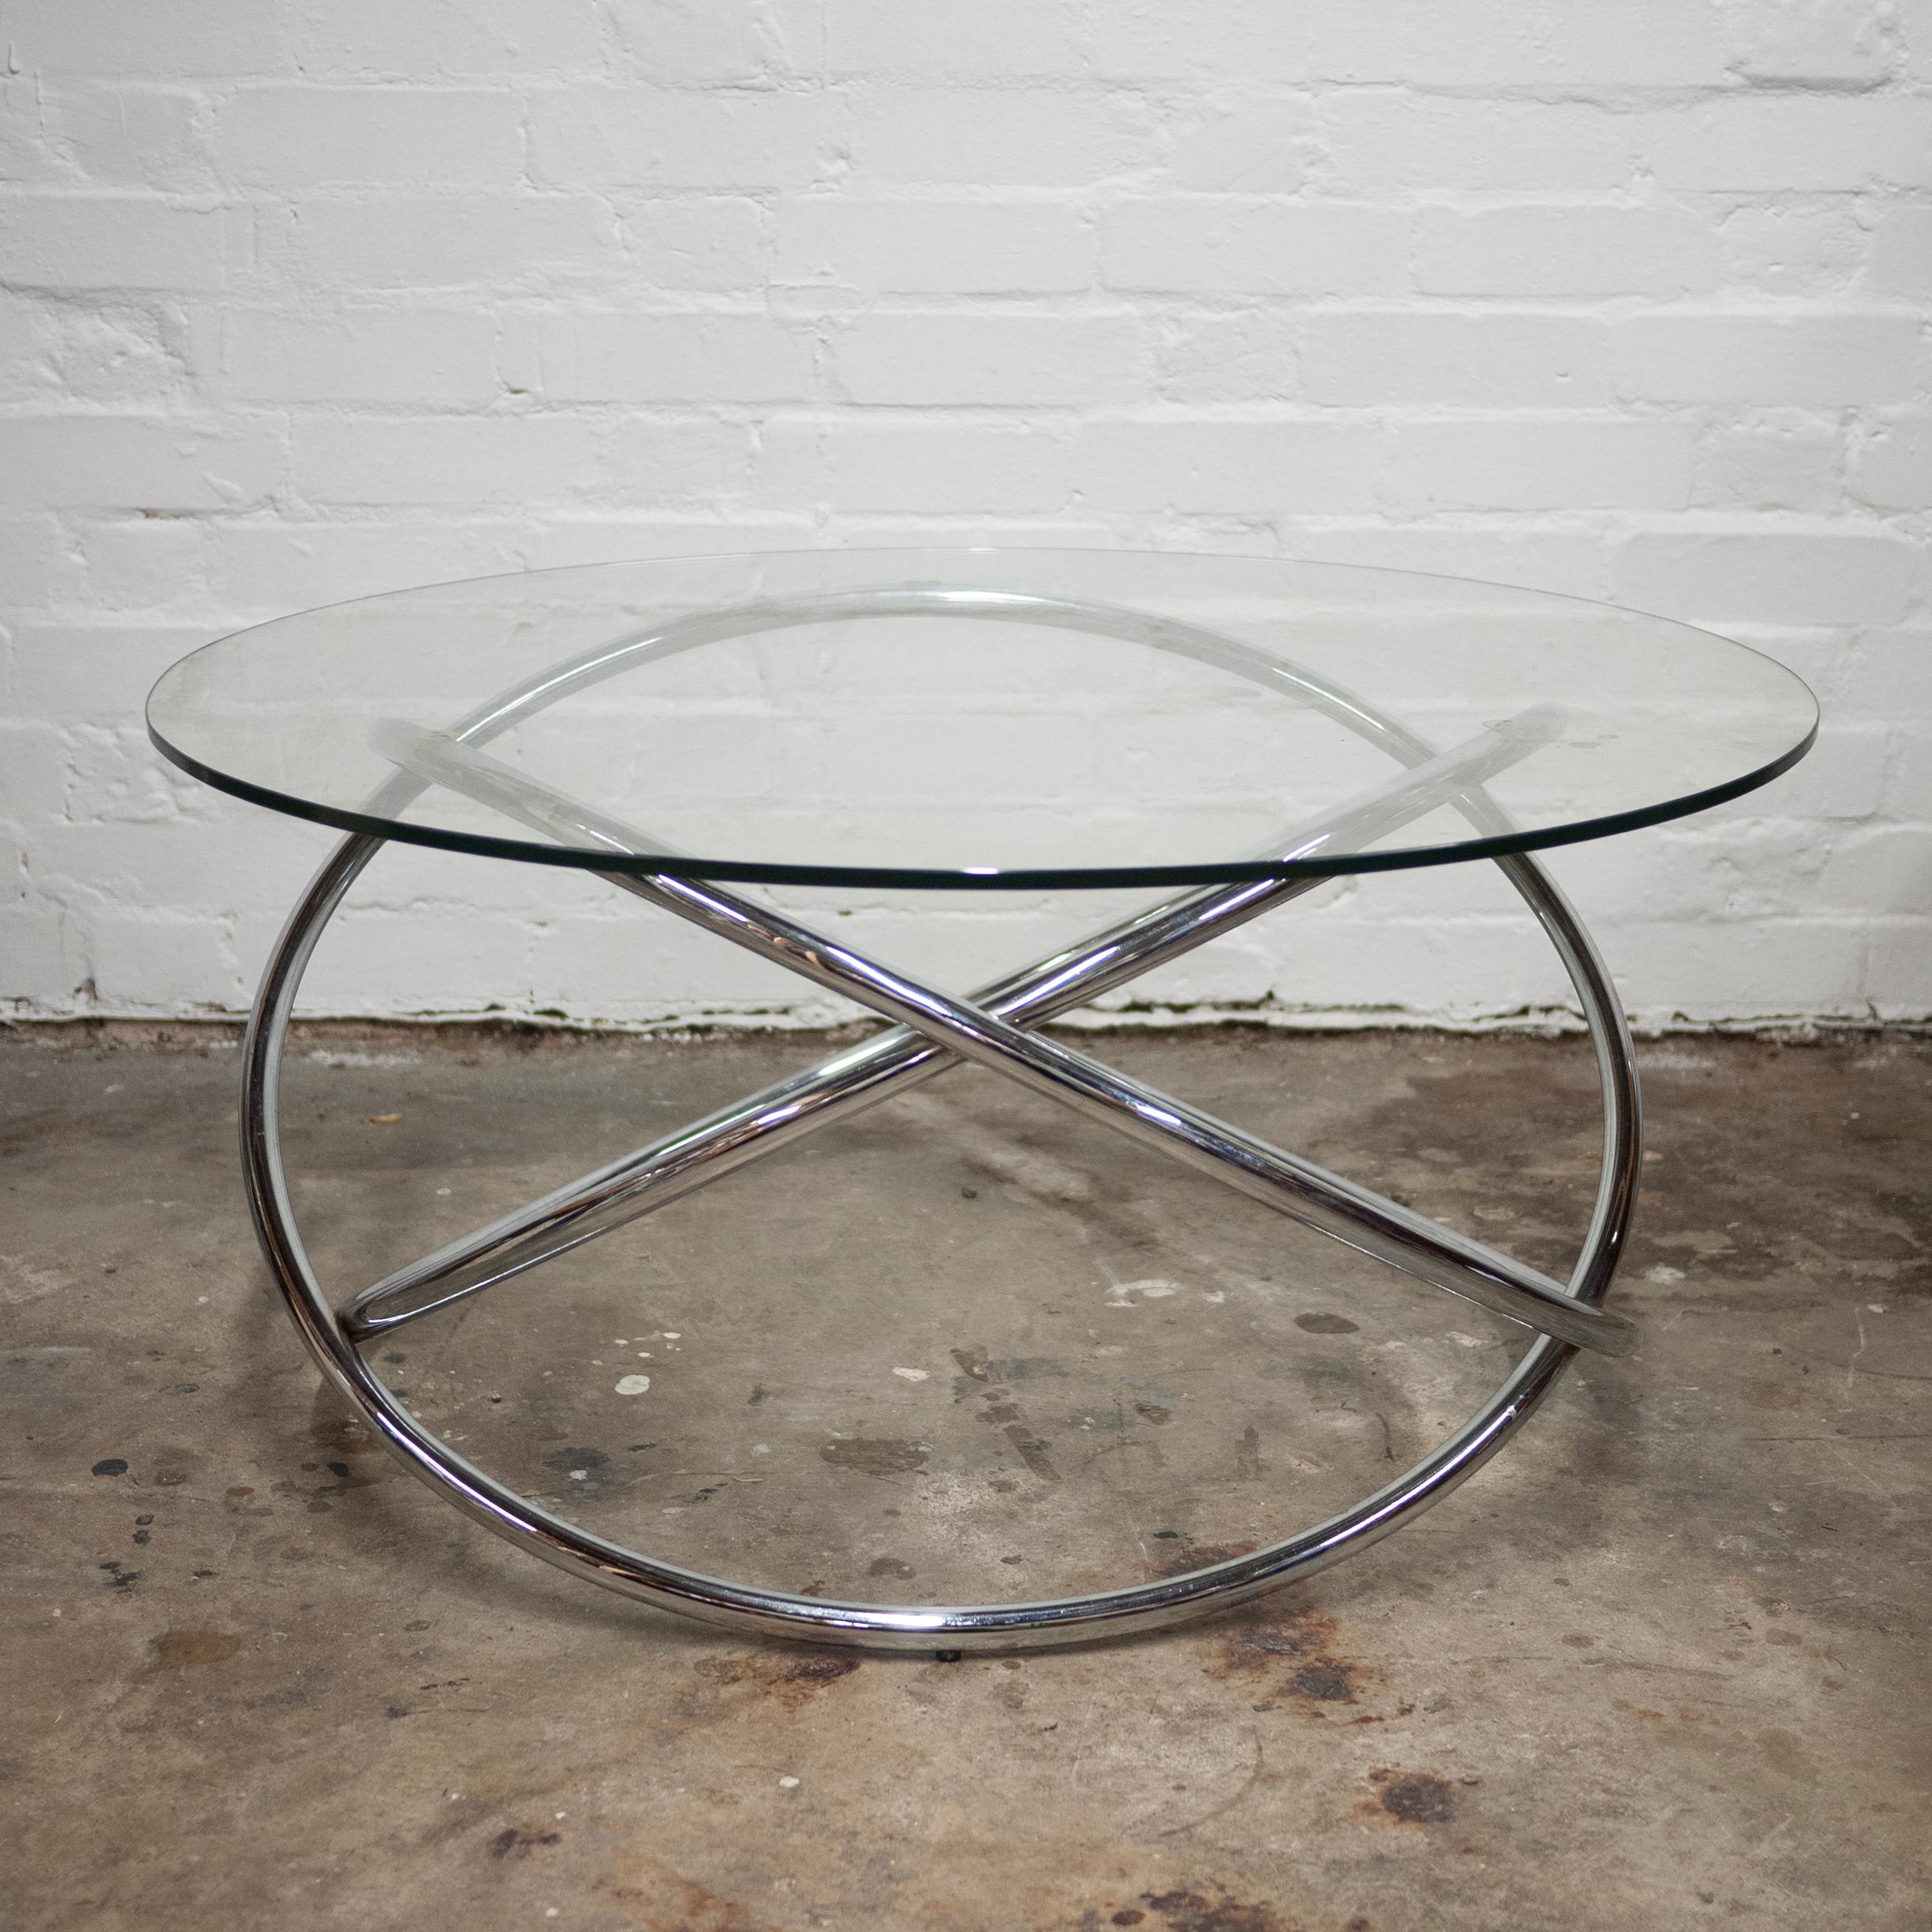 Vintage Italian Space Age Glass and Chrome Spiral Base Coffee Table, 1970s For Sale 1